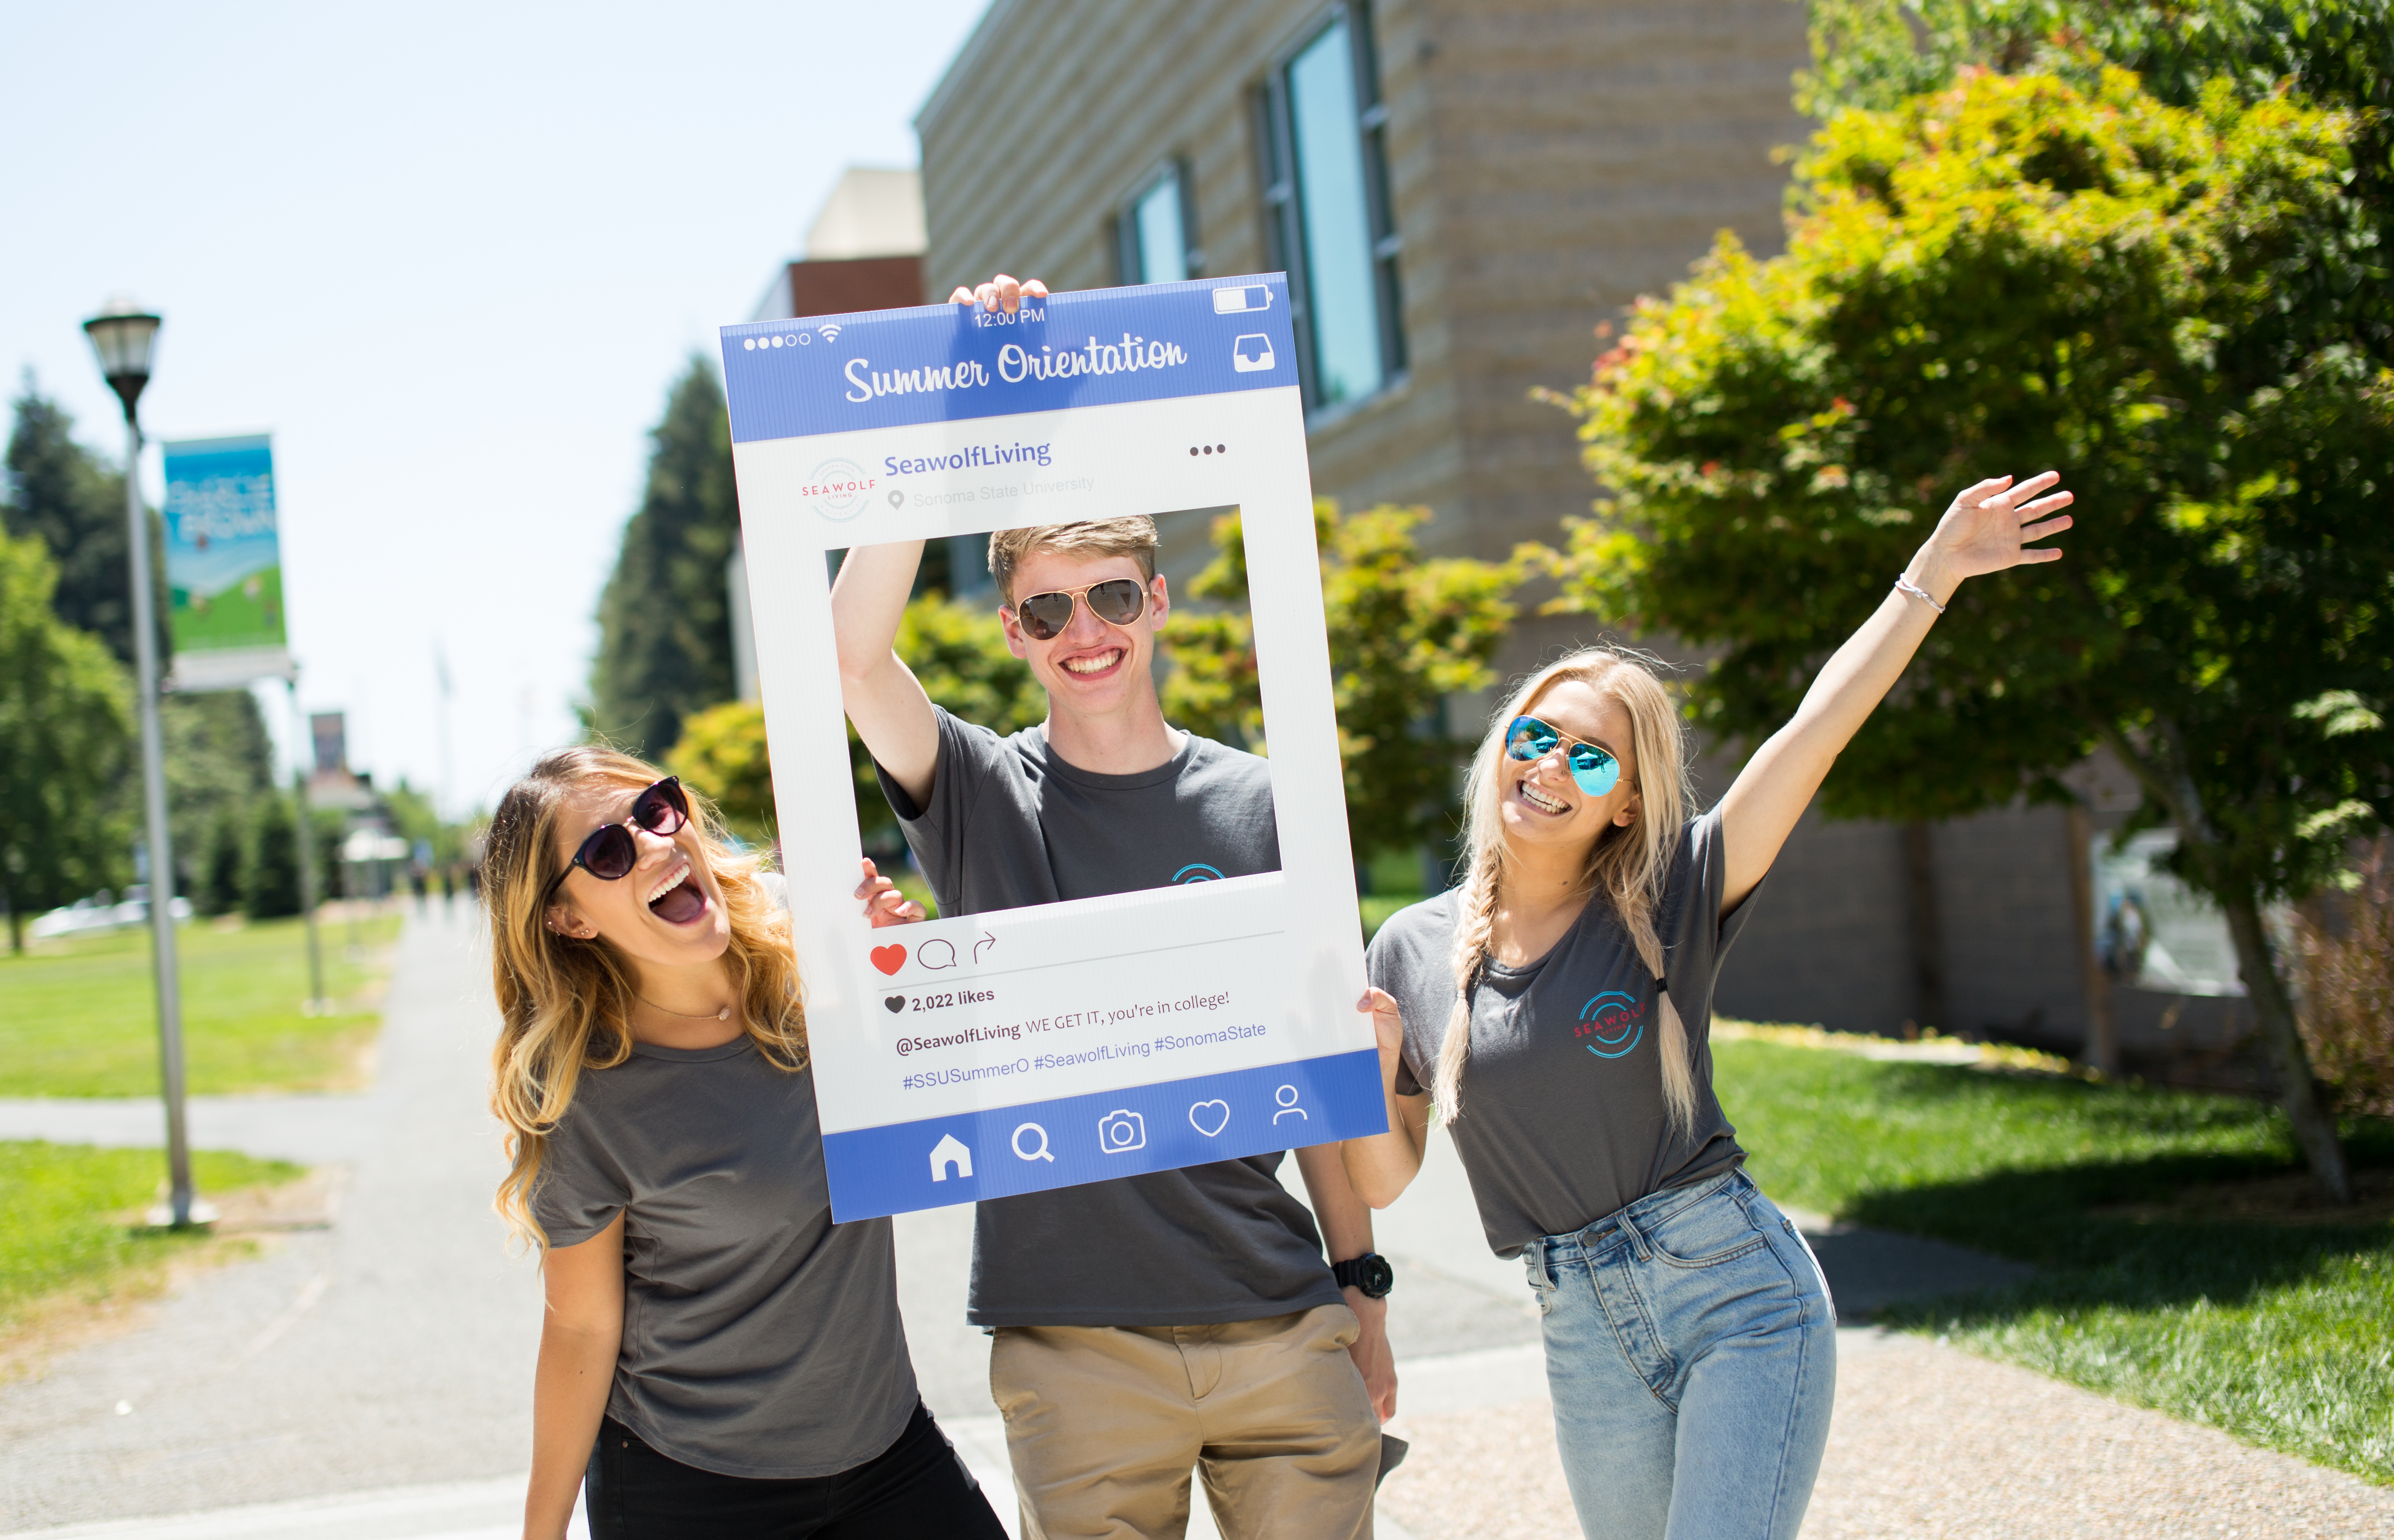 Three students pose with a cardboard cutout